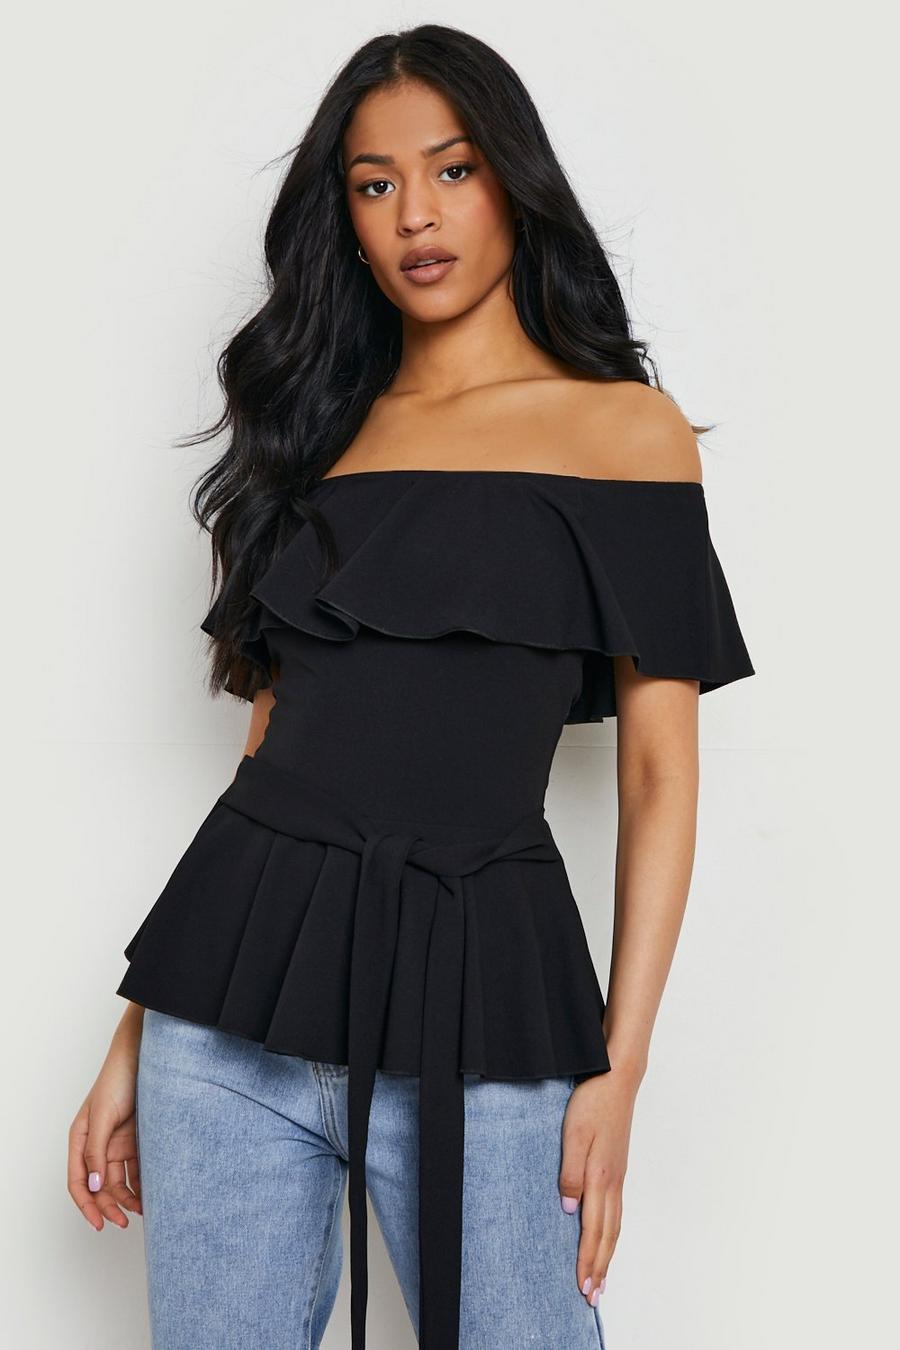 Black Tall Peplum Belted Off The Shoulder Top